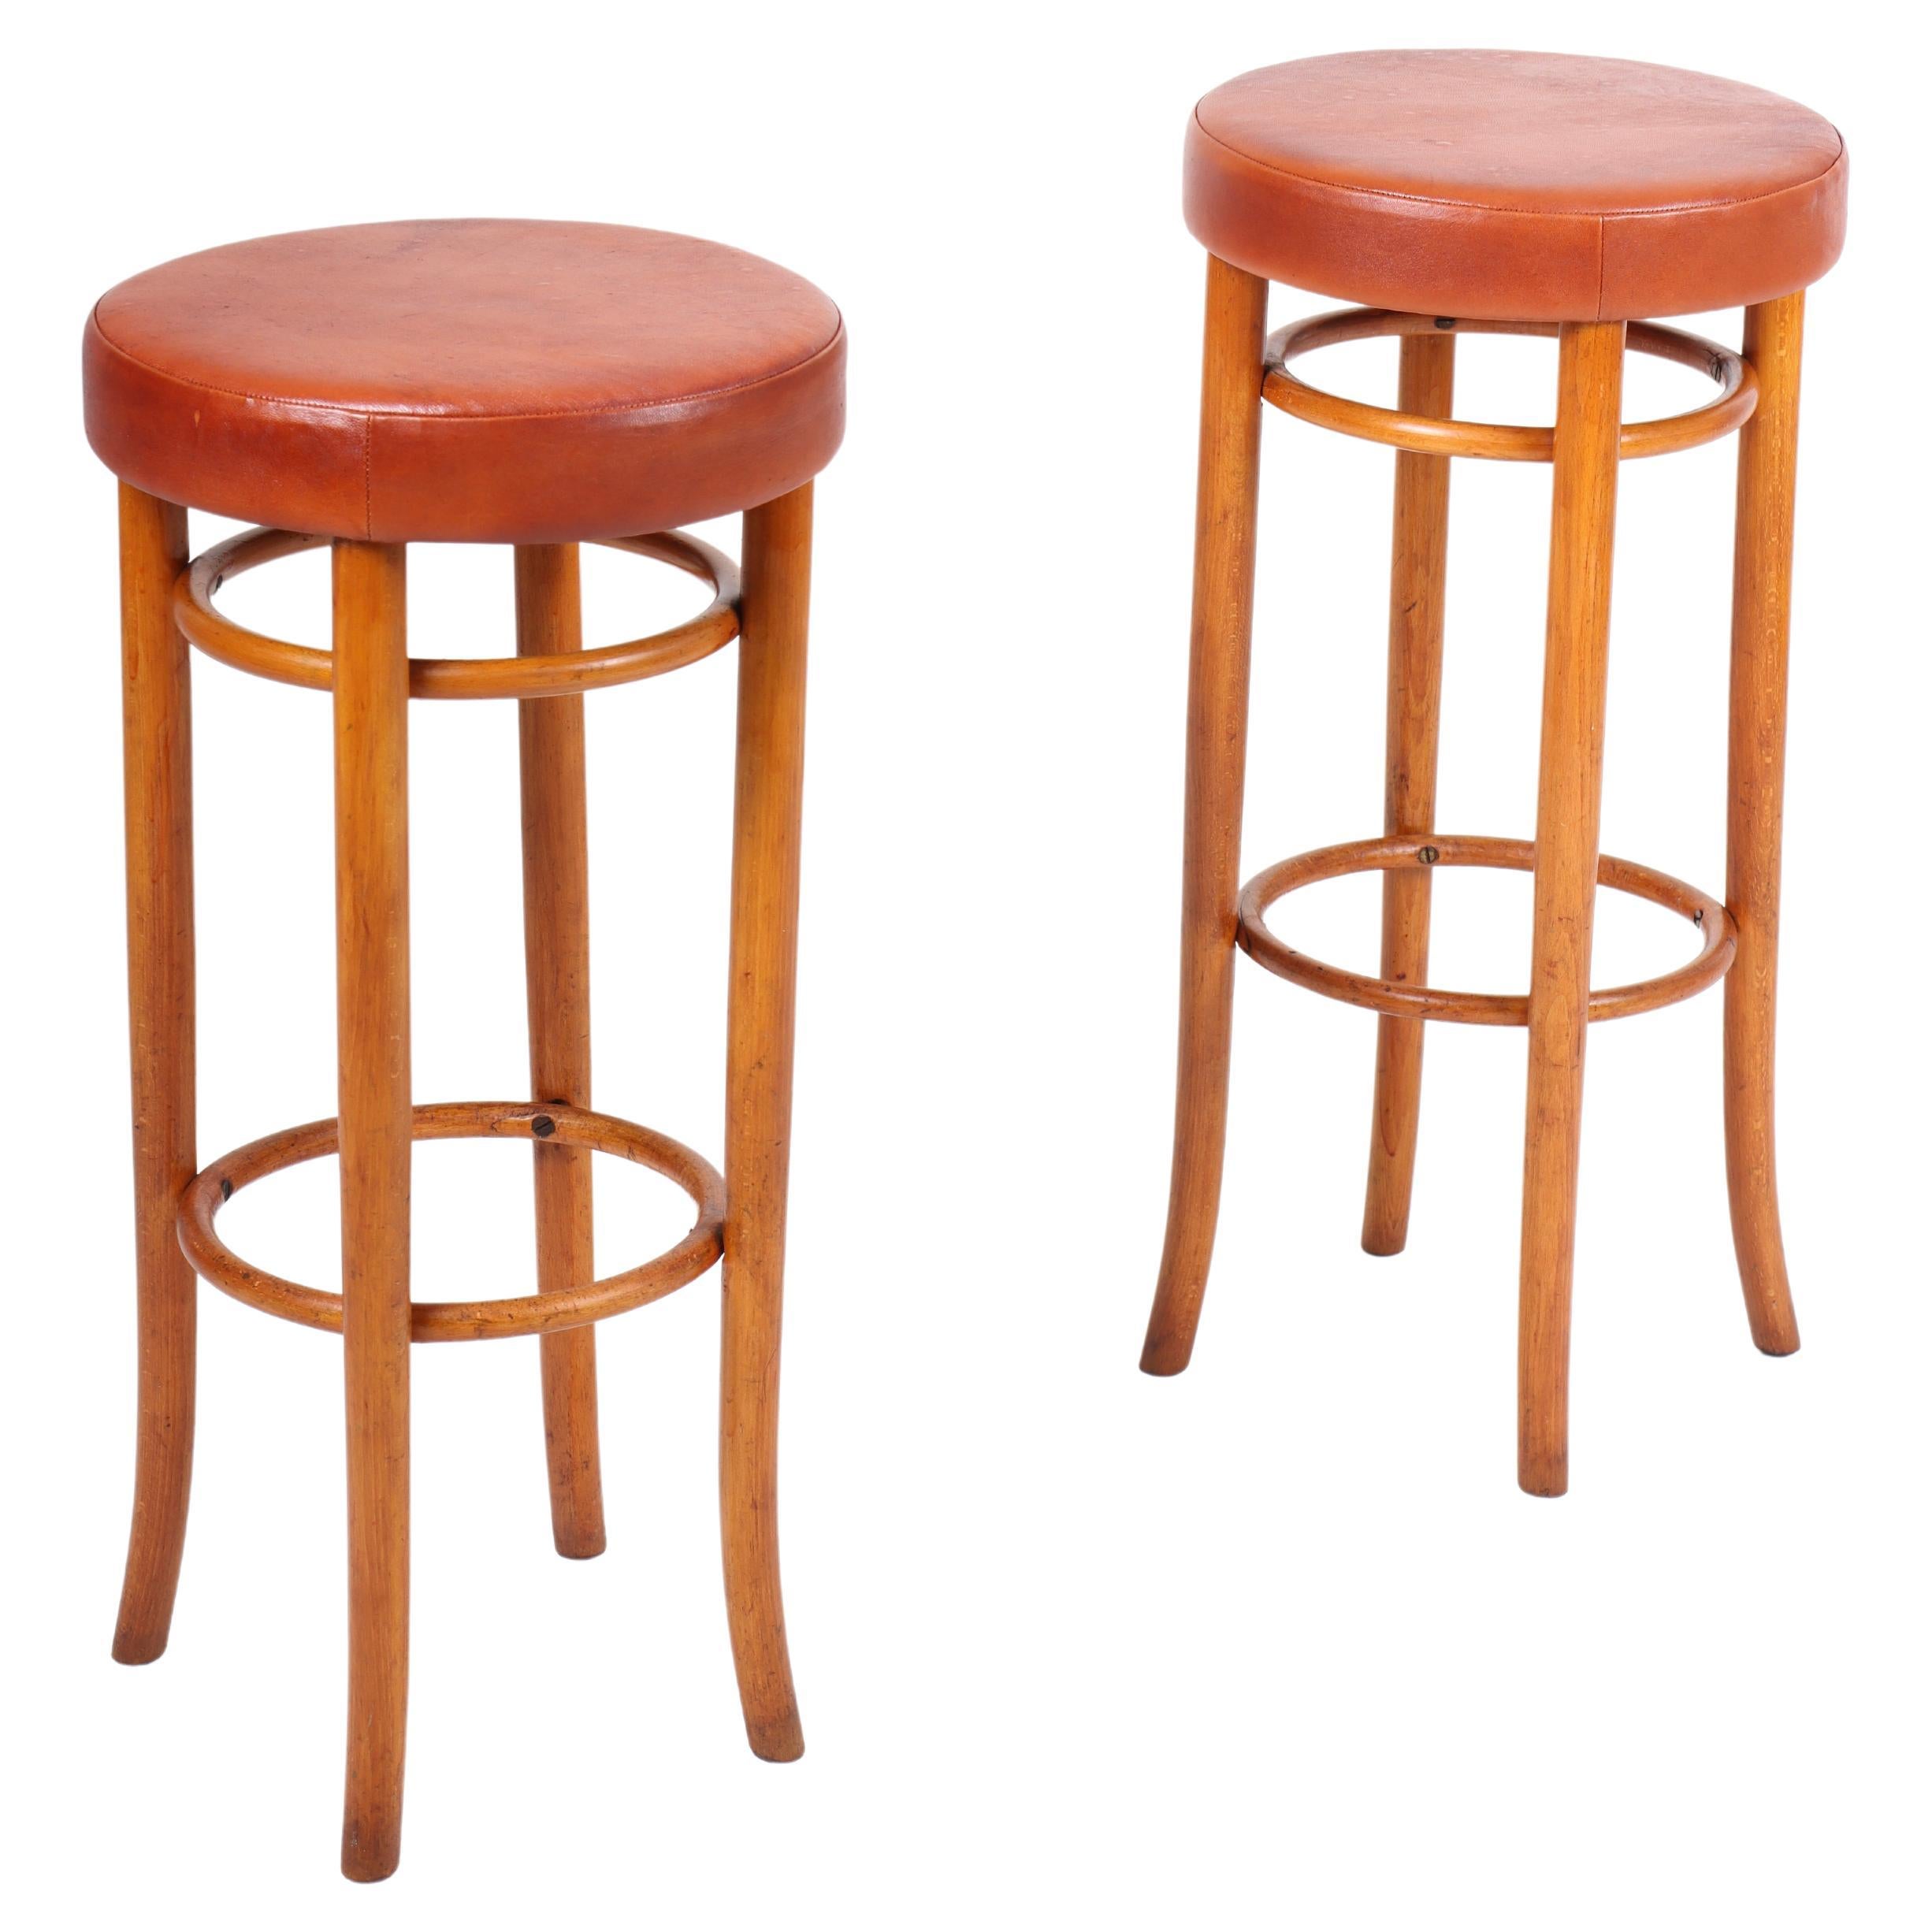 Pair of Bar Stools in Beech and Patinated Leather by Fritz Hansen, 1940s